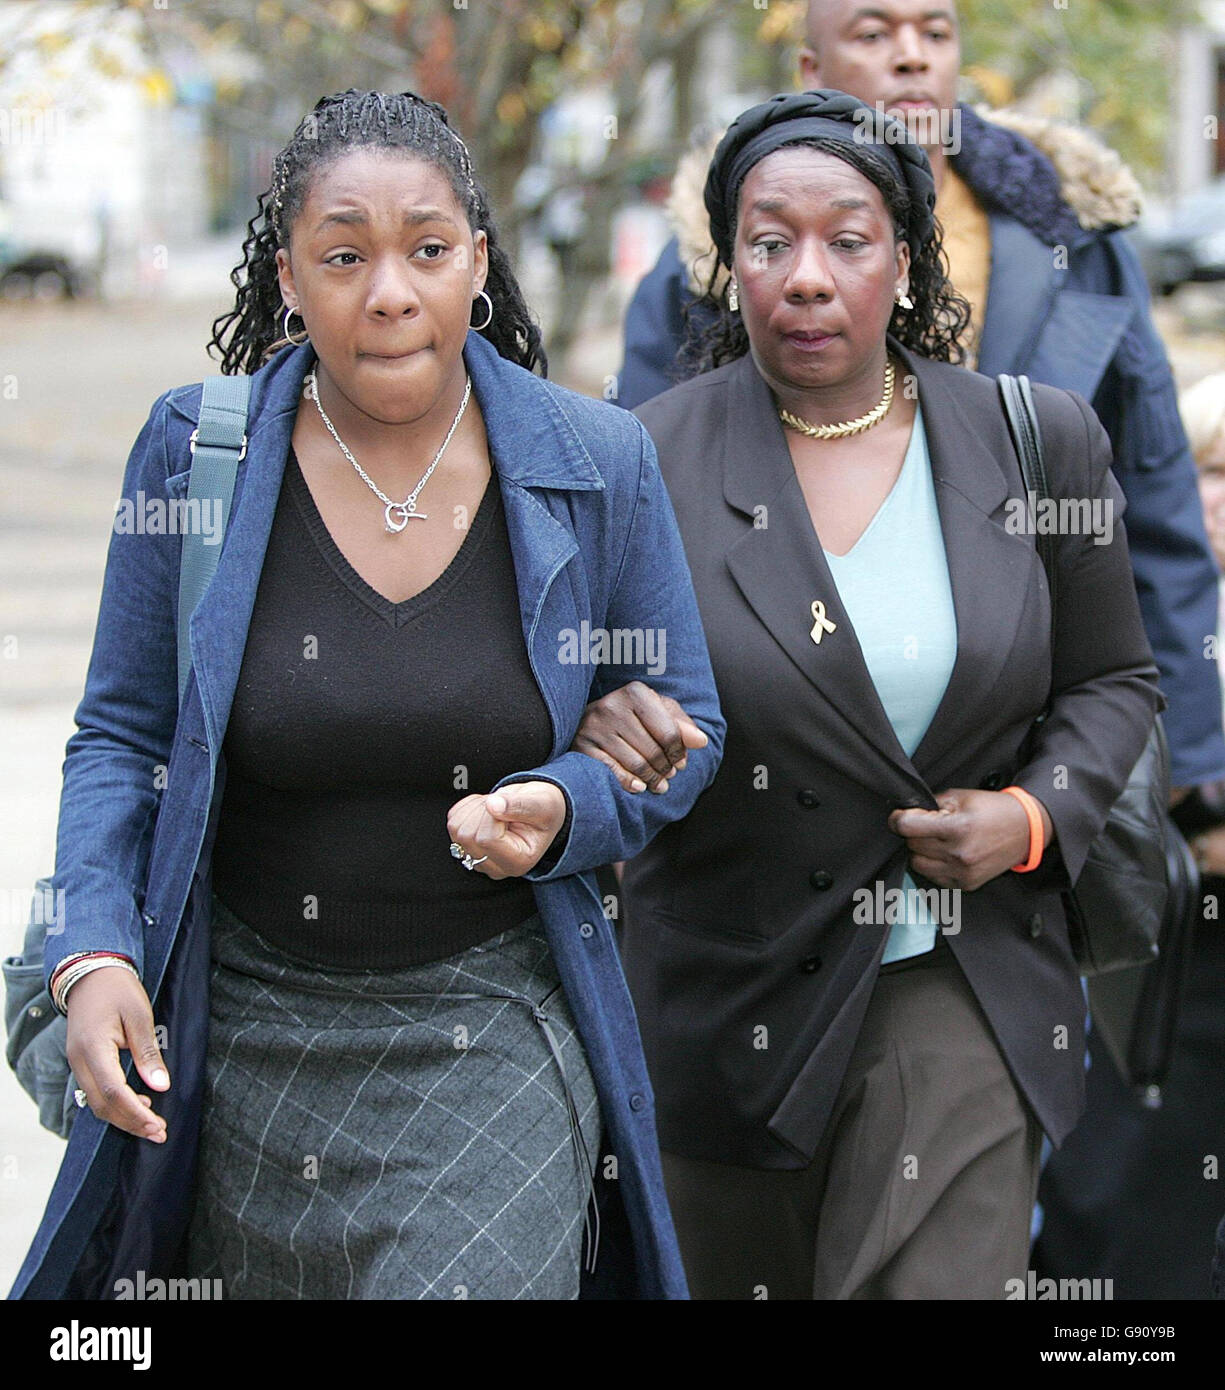 Gee Verona-Walker (Right), mother of Anthony Walker, arrives at Liverpool Crown Court with family members, Tuesday November 15 2005, where the two men accused of bludgeoning Anthony Walker to death with an axe go on trial. Paul Taylor and Michael Barton, aged 20 and 17, allegedly attacked the 18-year-old in July as he walked through Huyton, Merseyside, with his girlfriend and cousin. See PA story COURTS Axe. PRESS ASSOCIATION Photo. Photo credit should read: Martin Rickett/PA Stock Photo